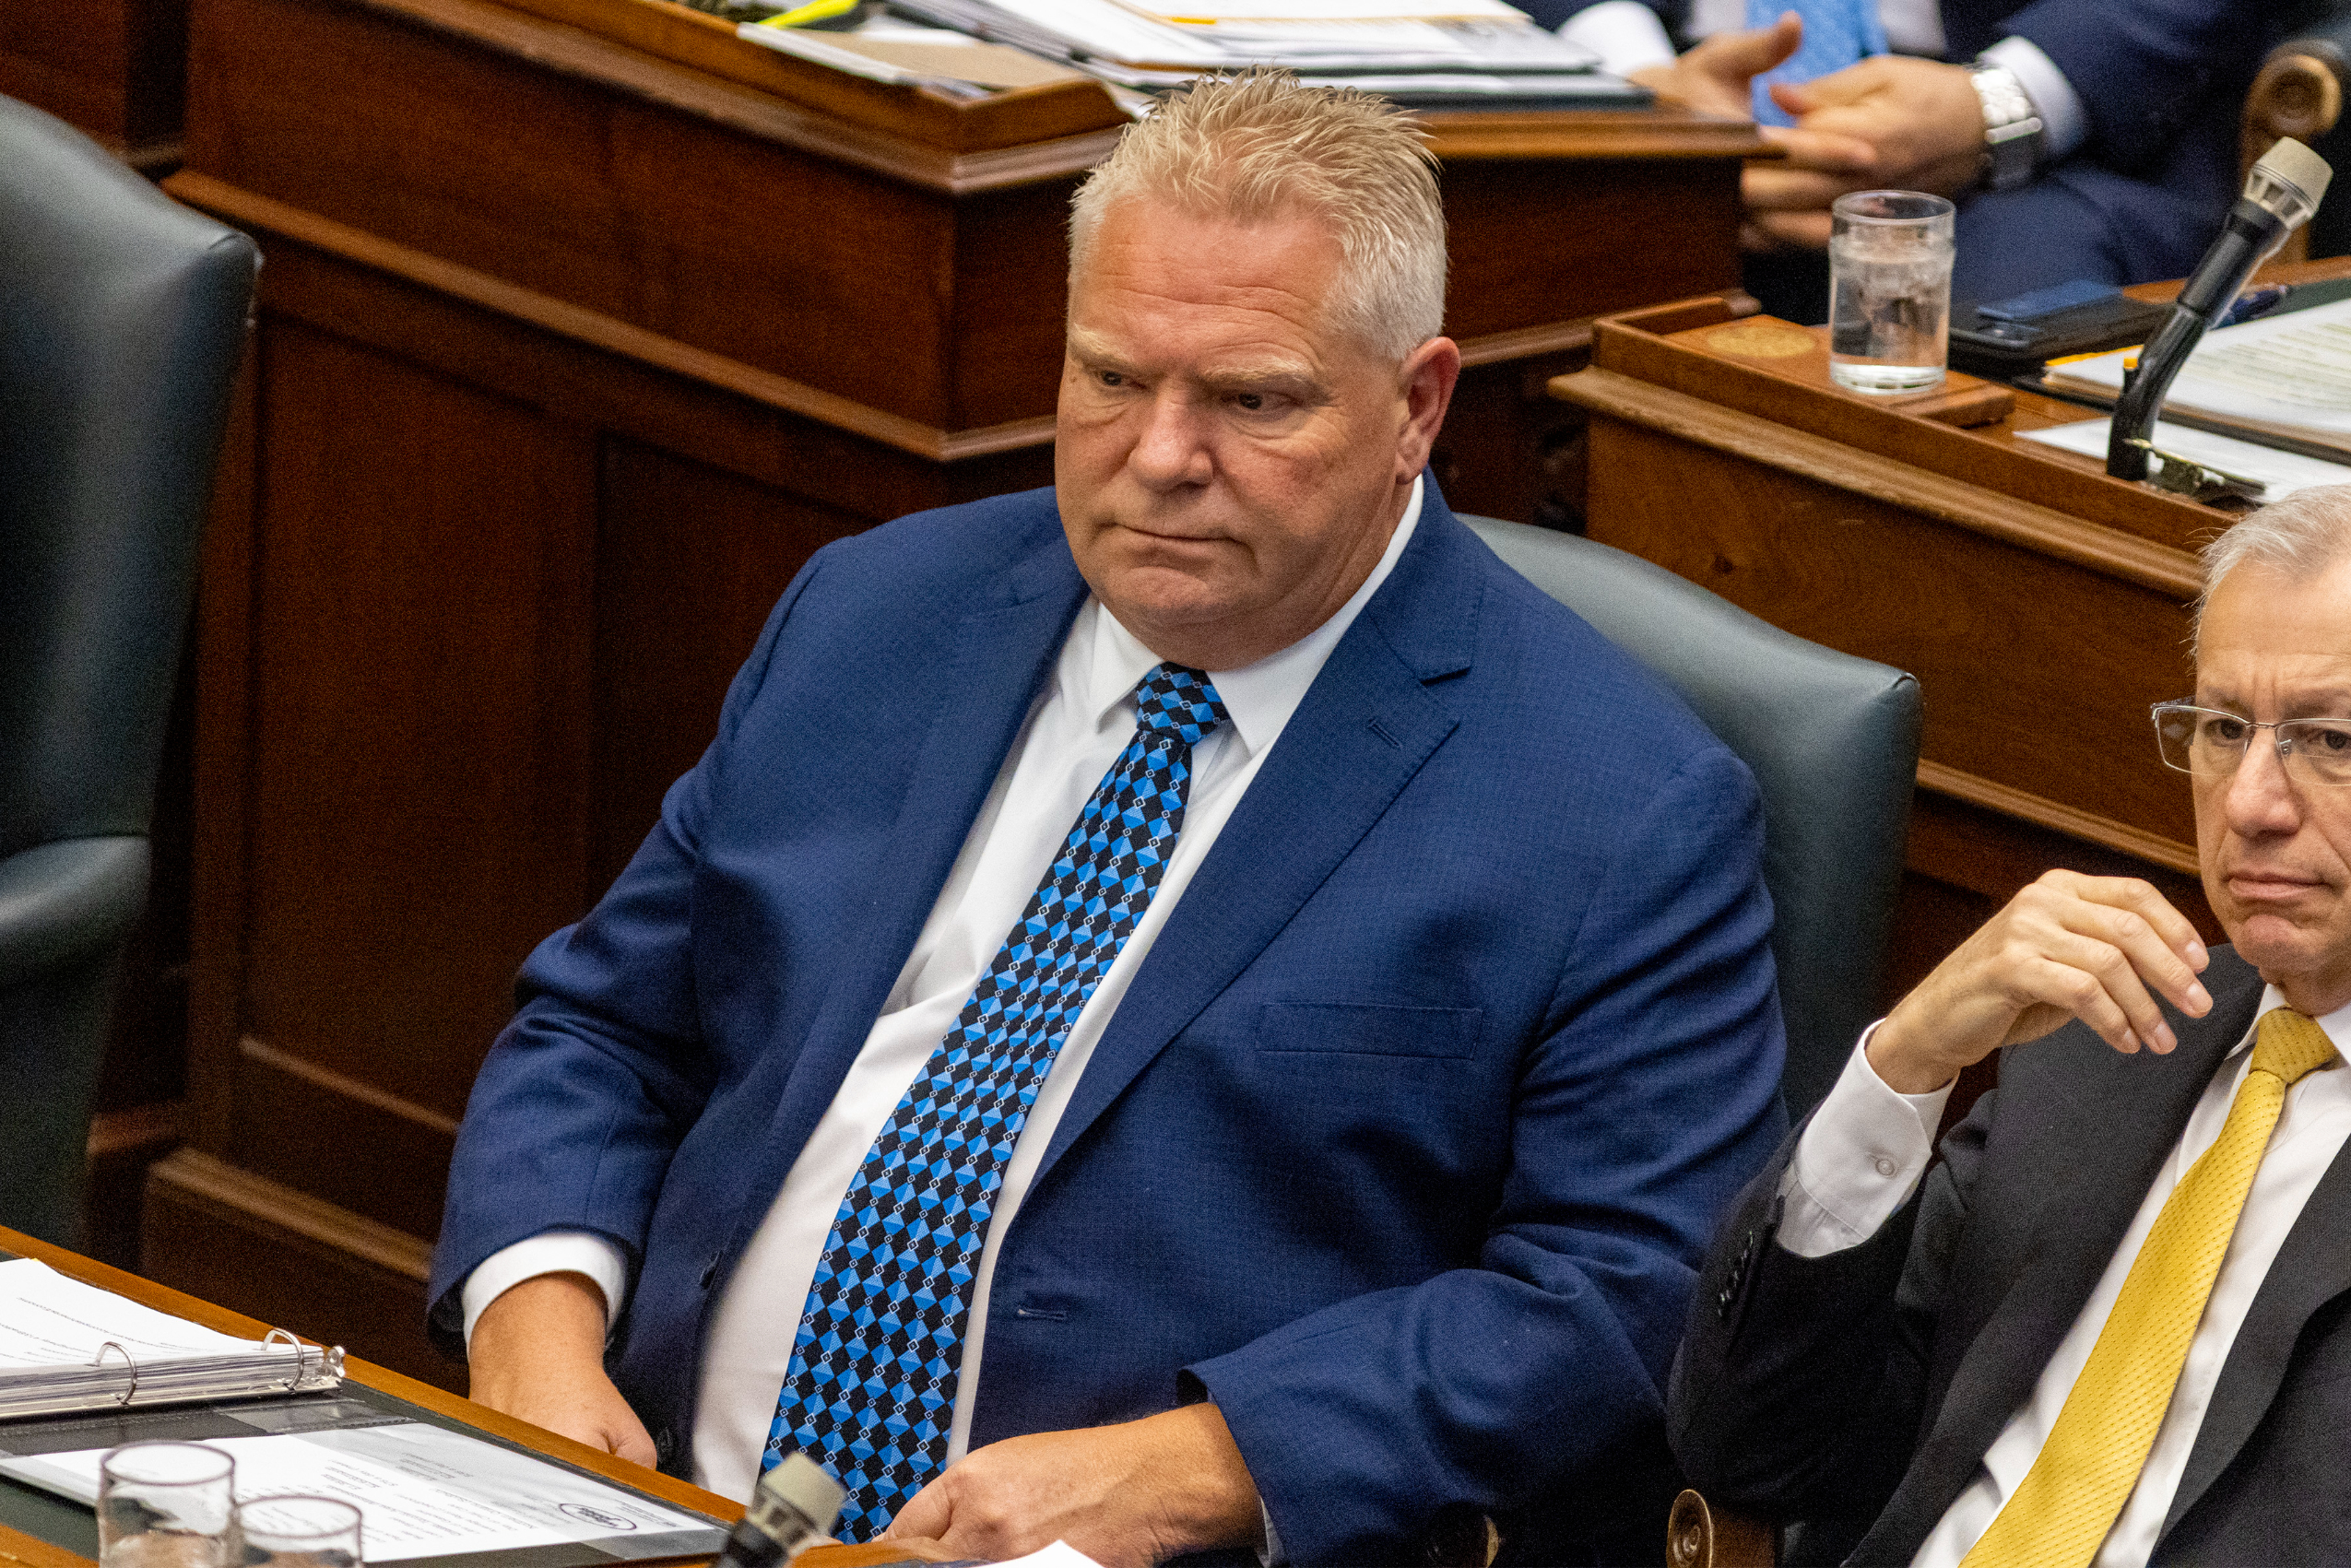 Ring of Fire: Ontario Premier Doug Ford stares straight ahead inside Queen's Park